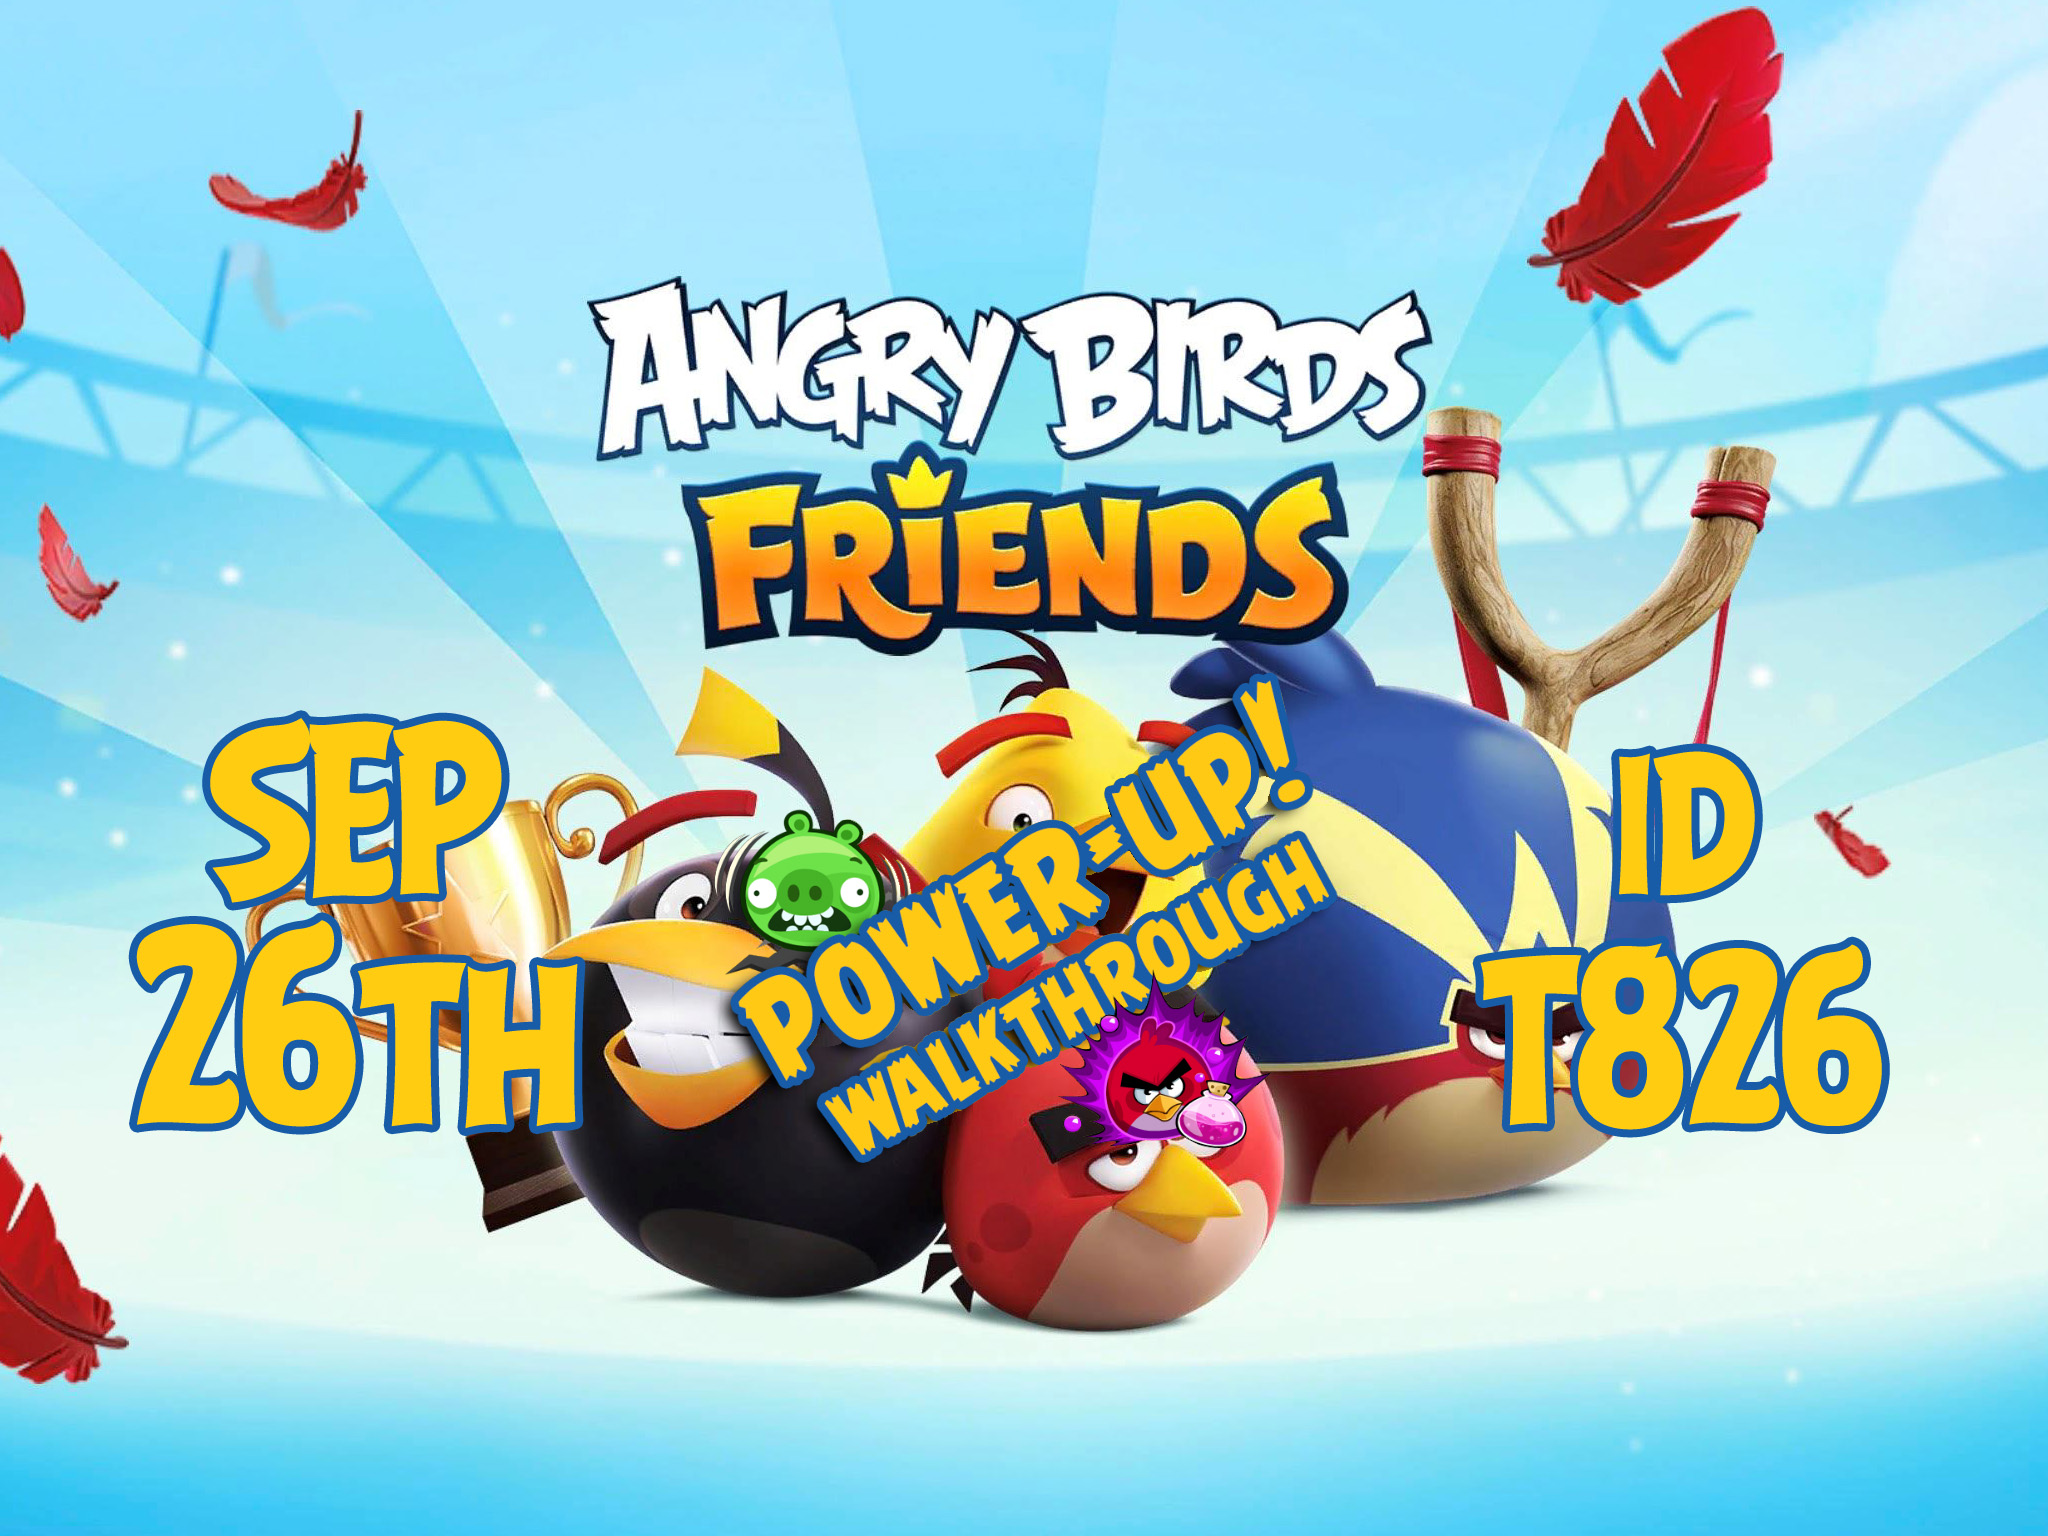 Angry-Birds-Friends-Tournament-T826-Feature-Image-PU